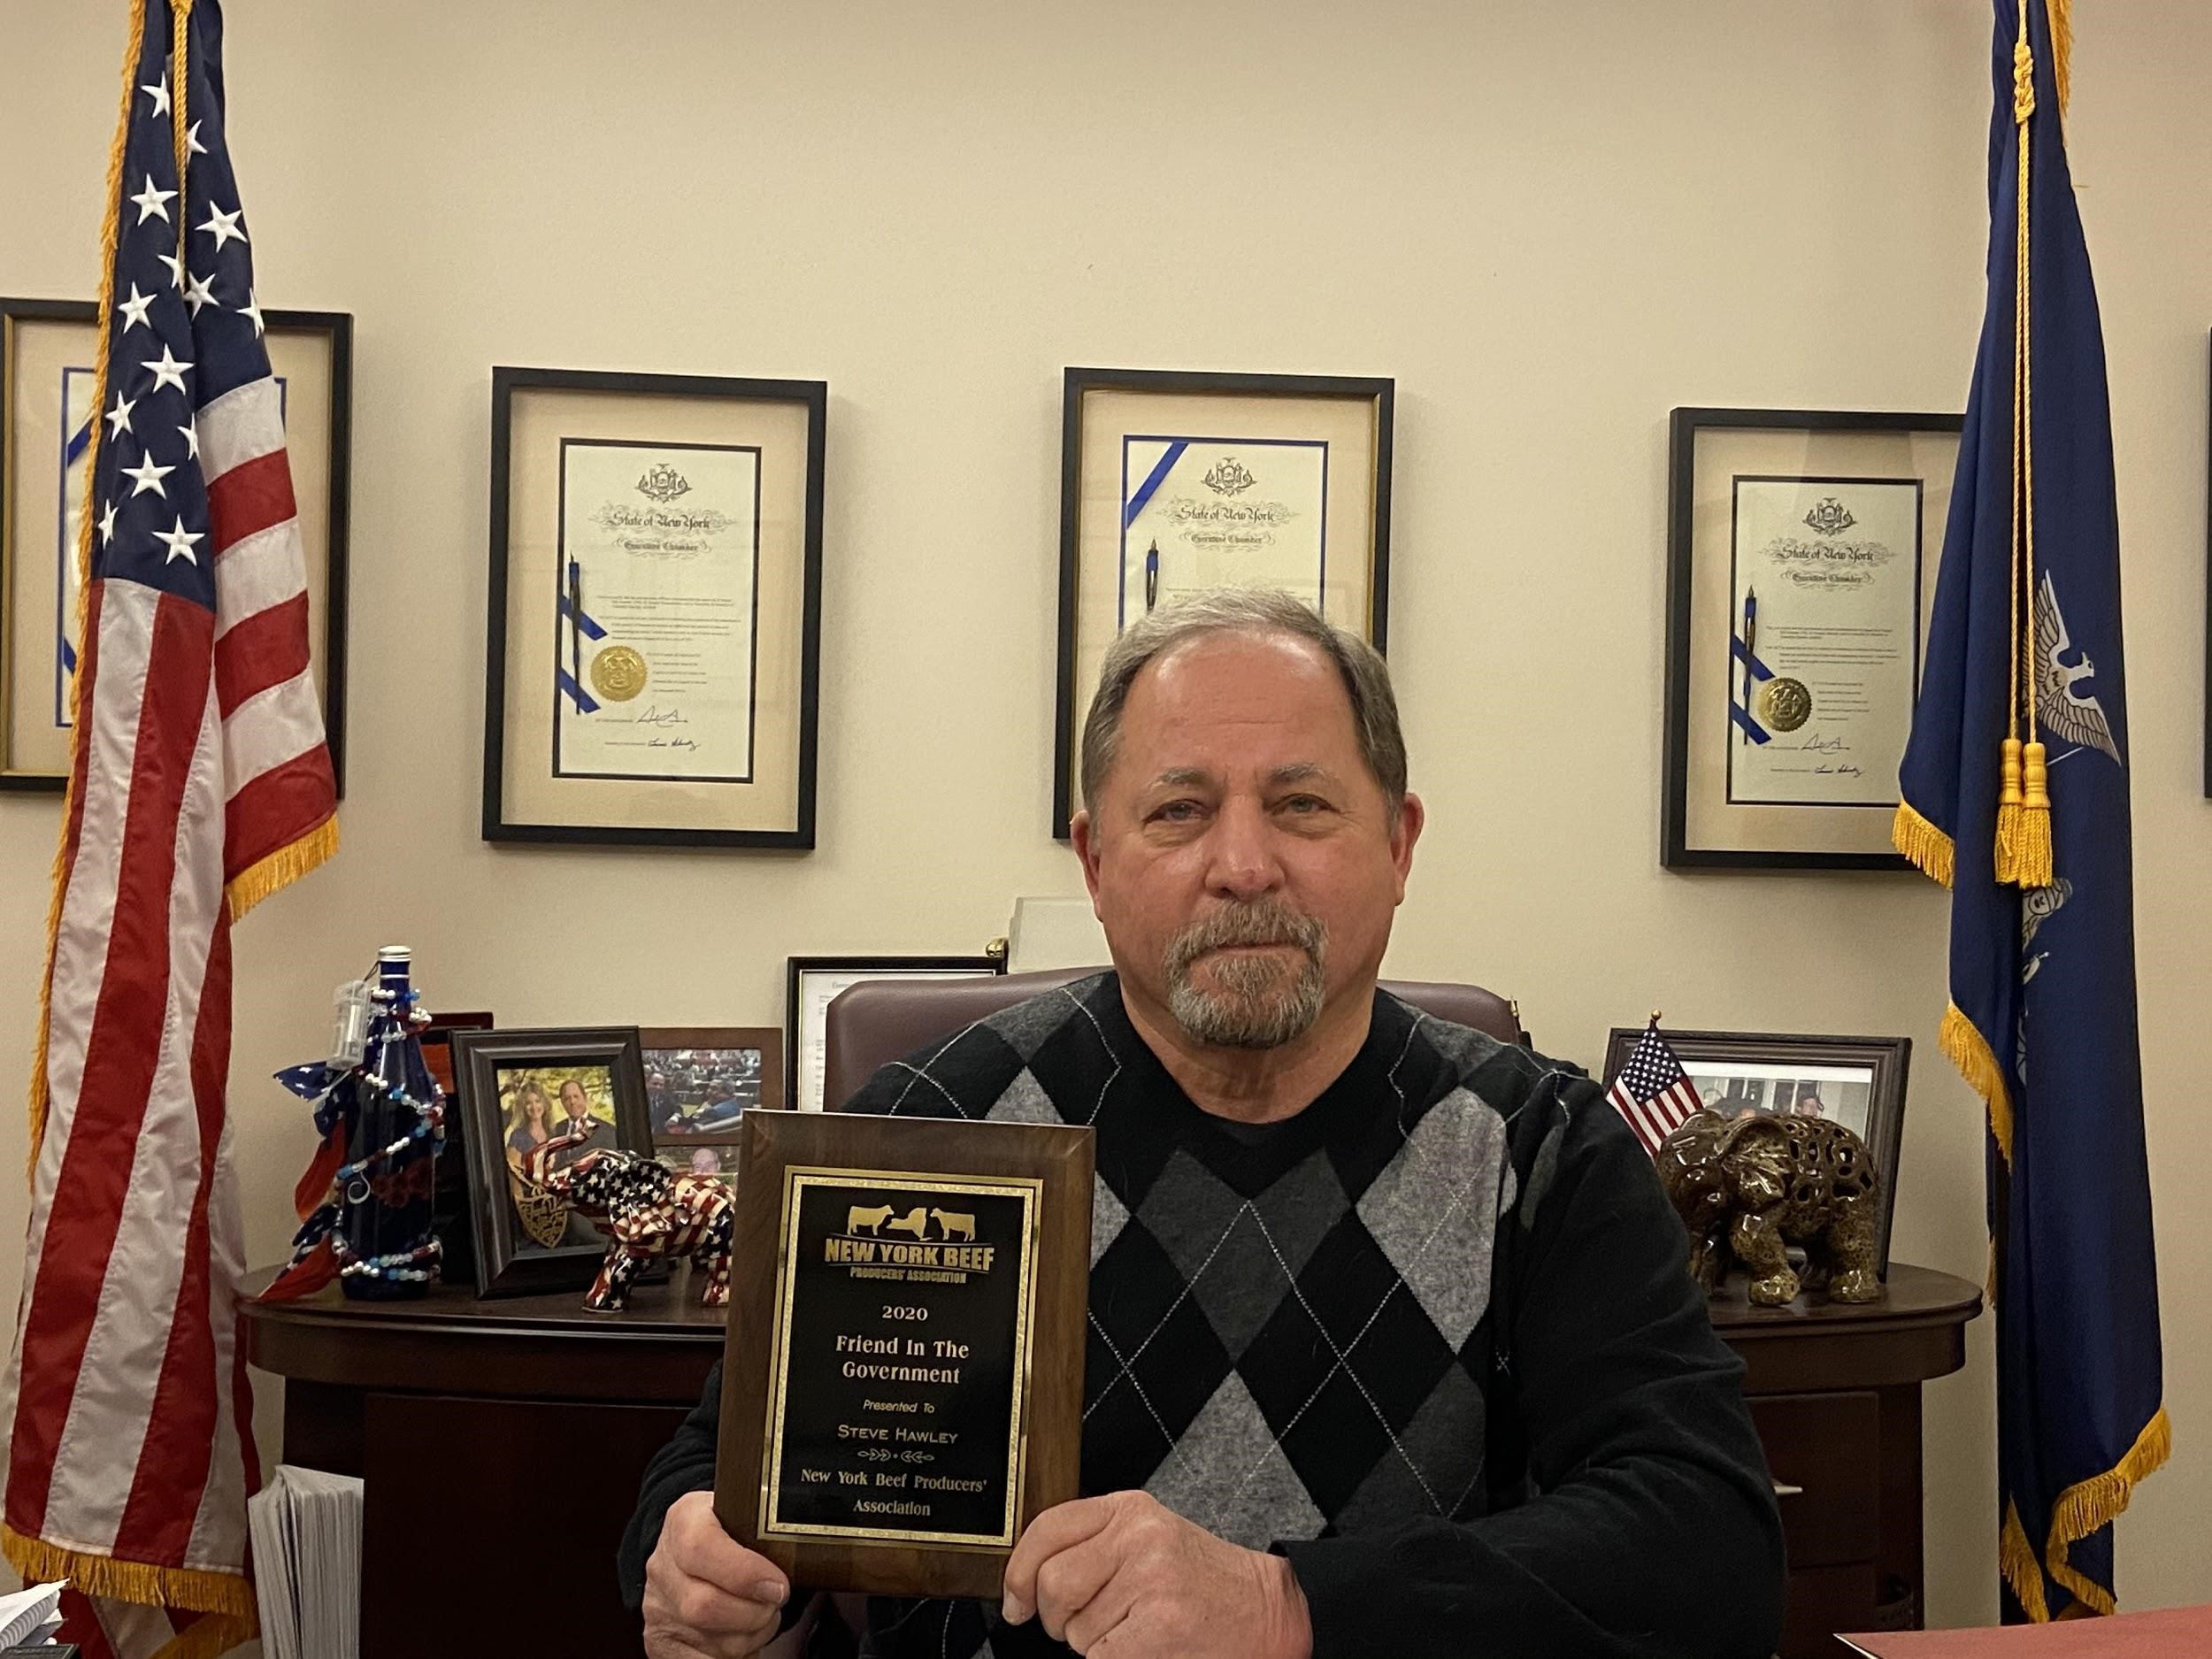 Assemblyman Hawley receives his award from the New York Beef Producers Association on February 5, 2021